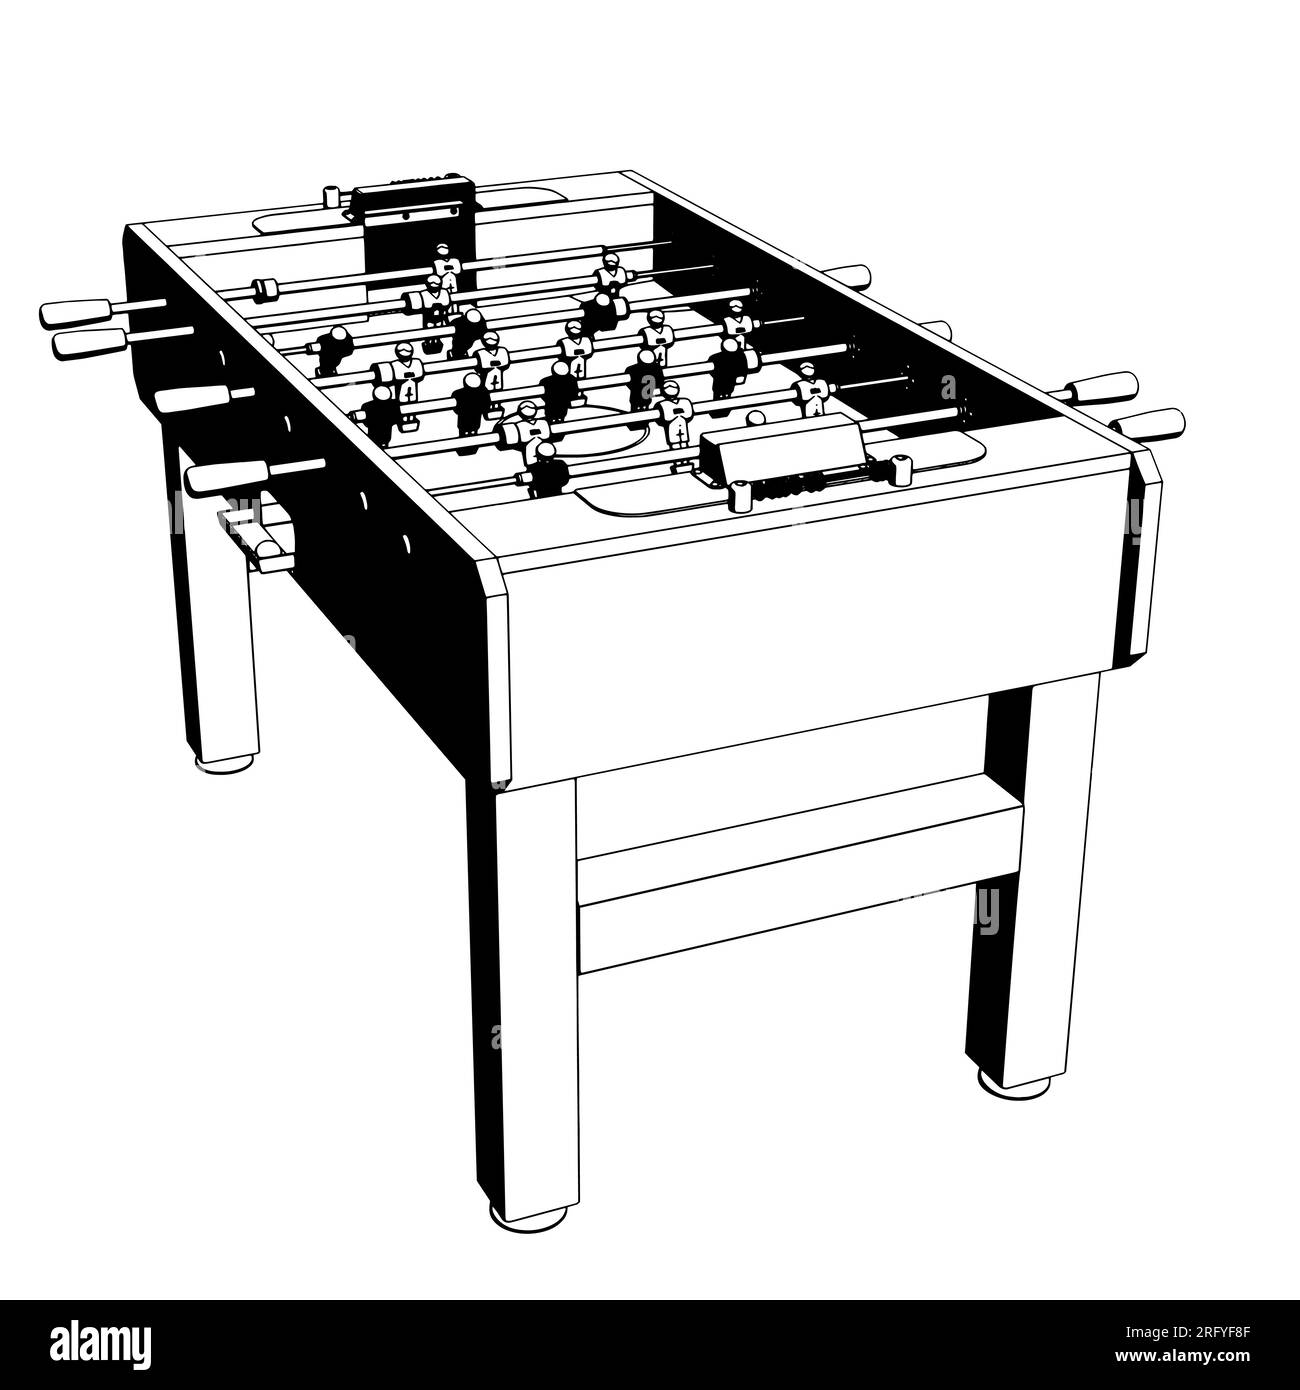 Stylized vector illustration of a classic foosball table Stock Vector